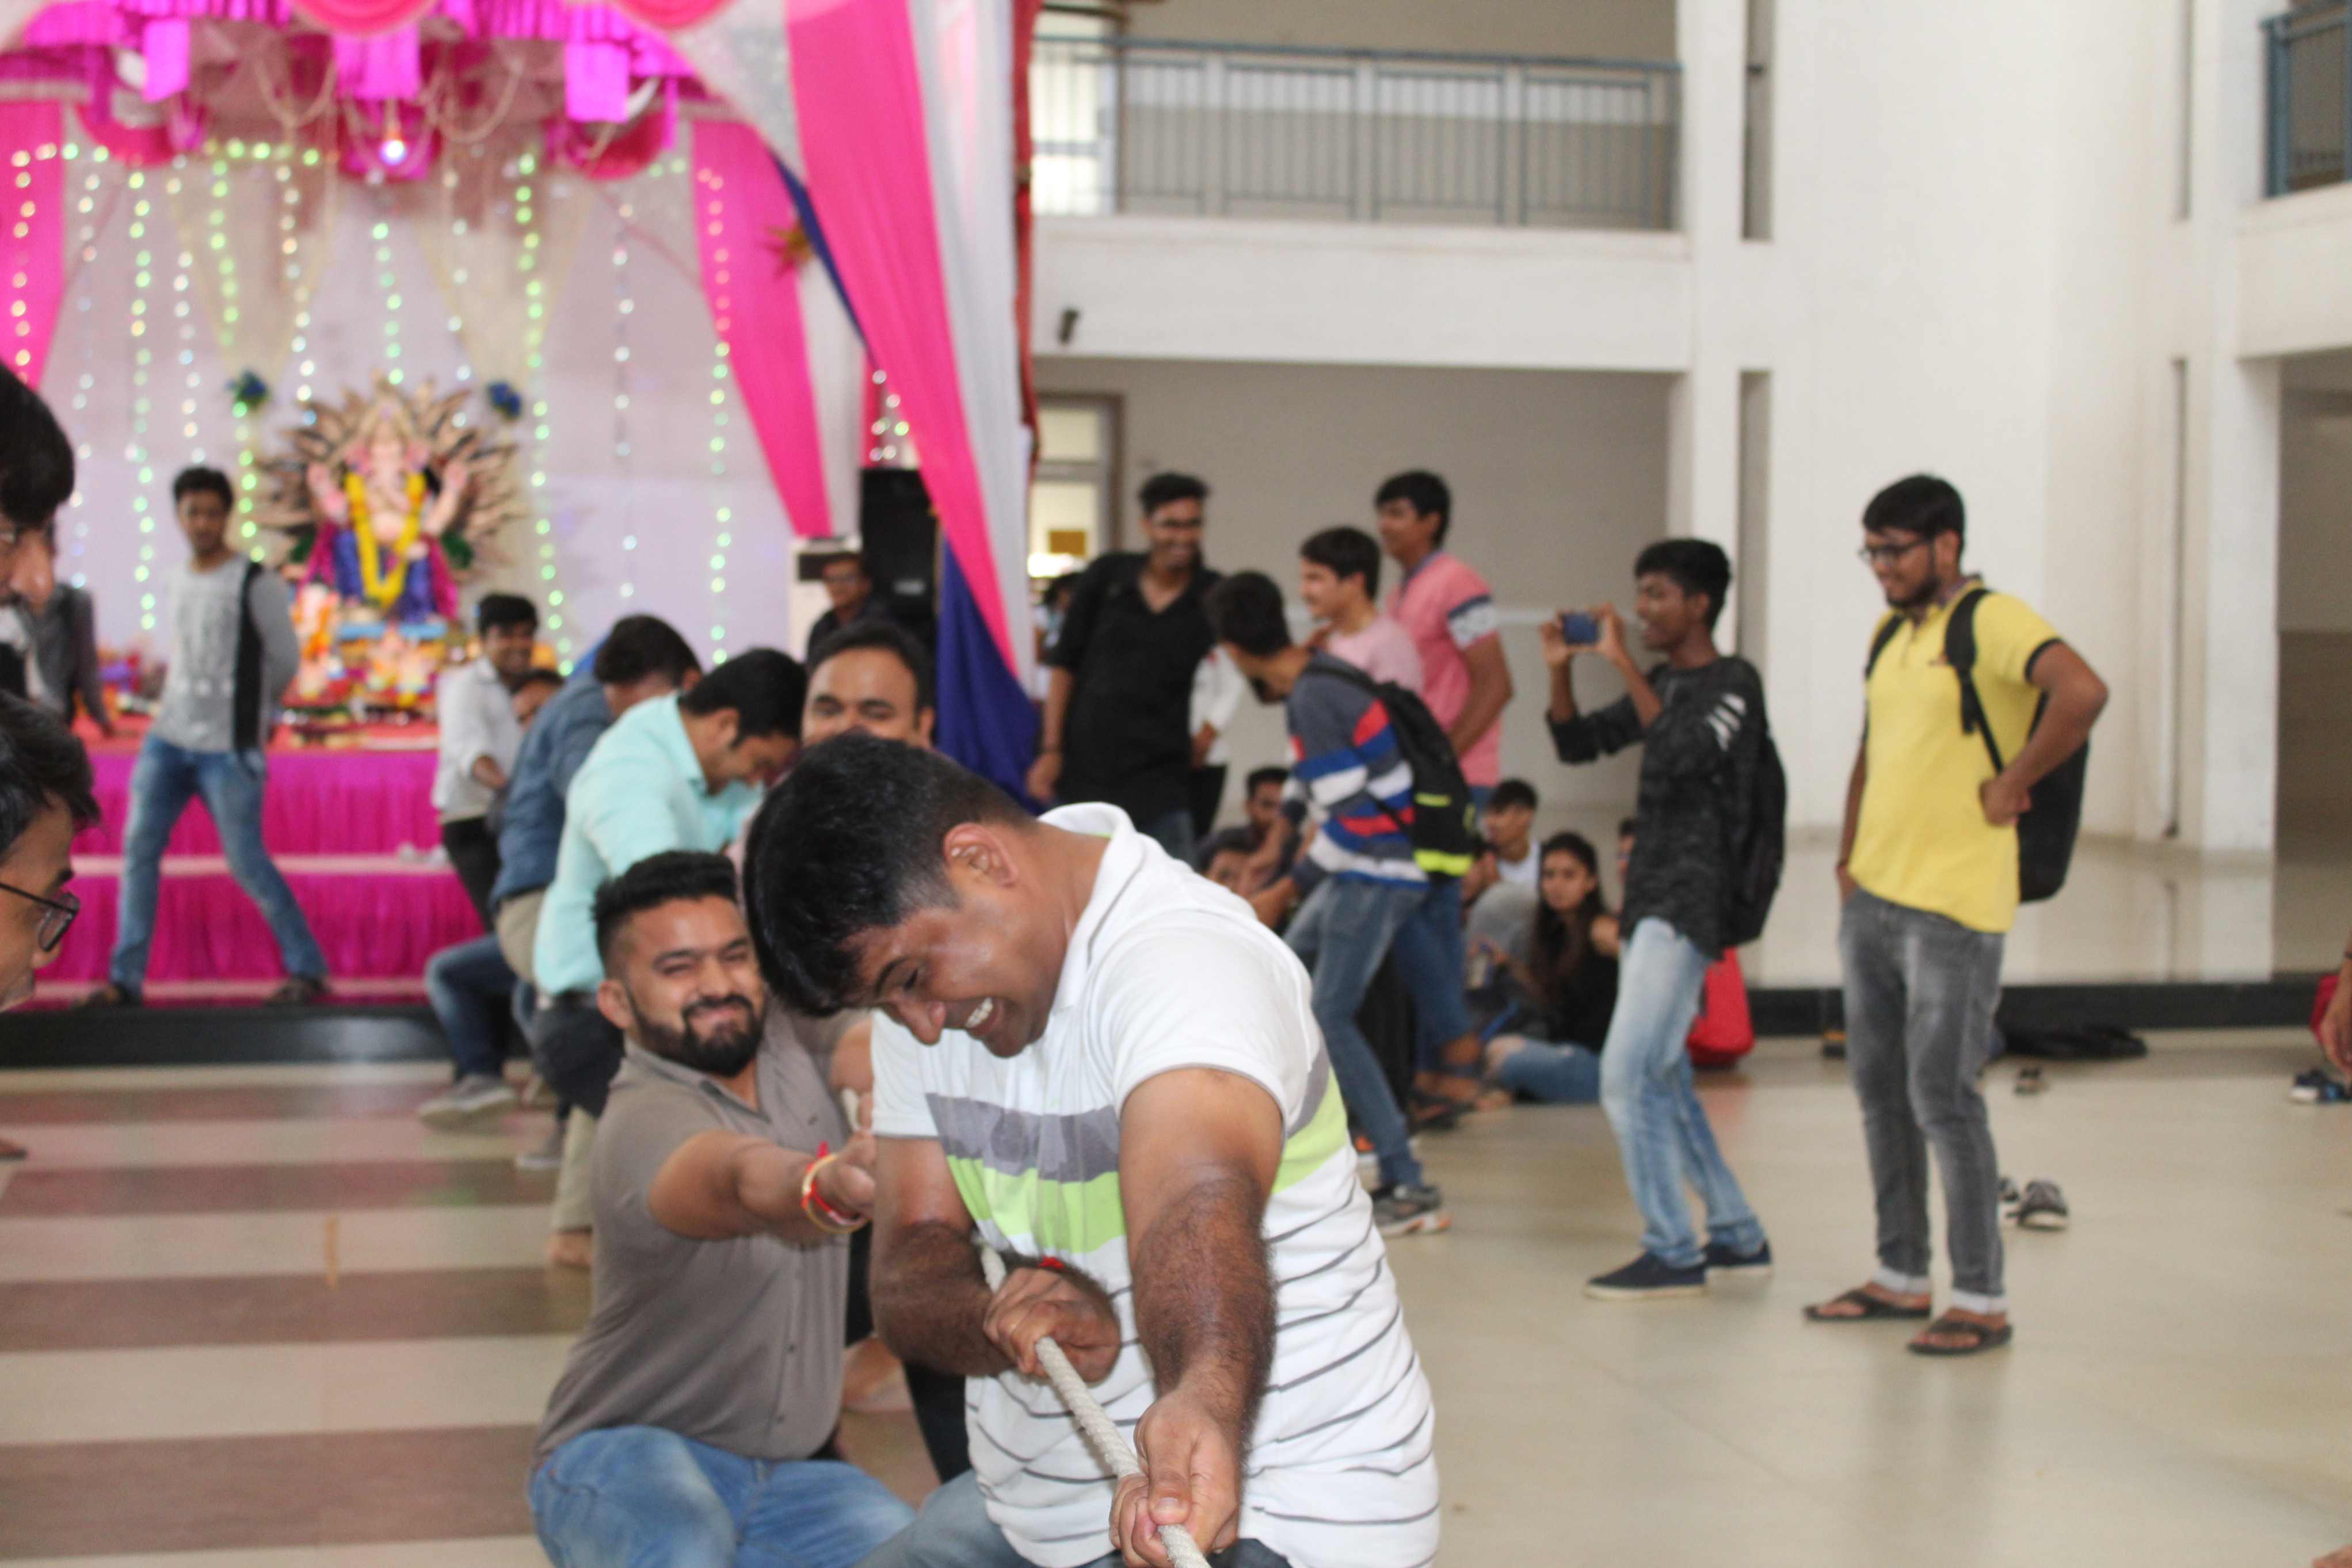 Tug of War - Inter class competition